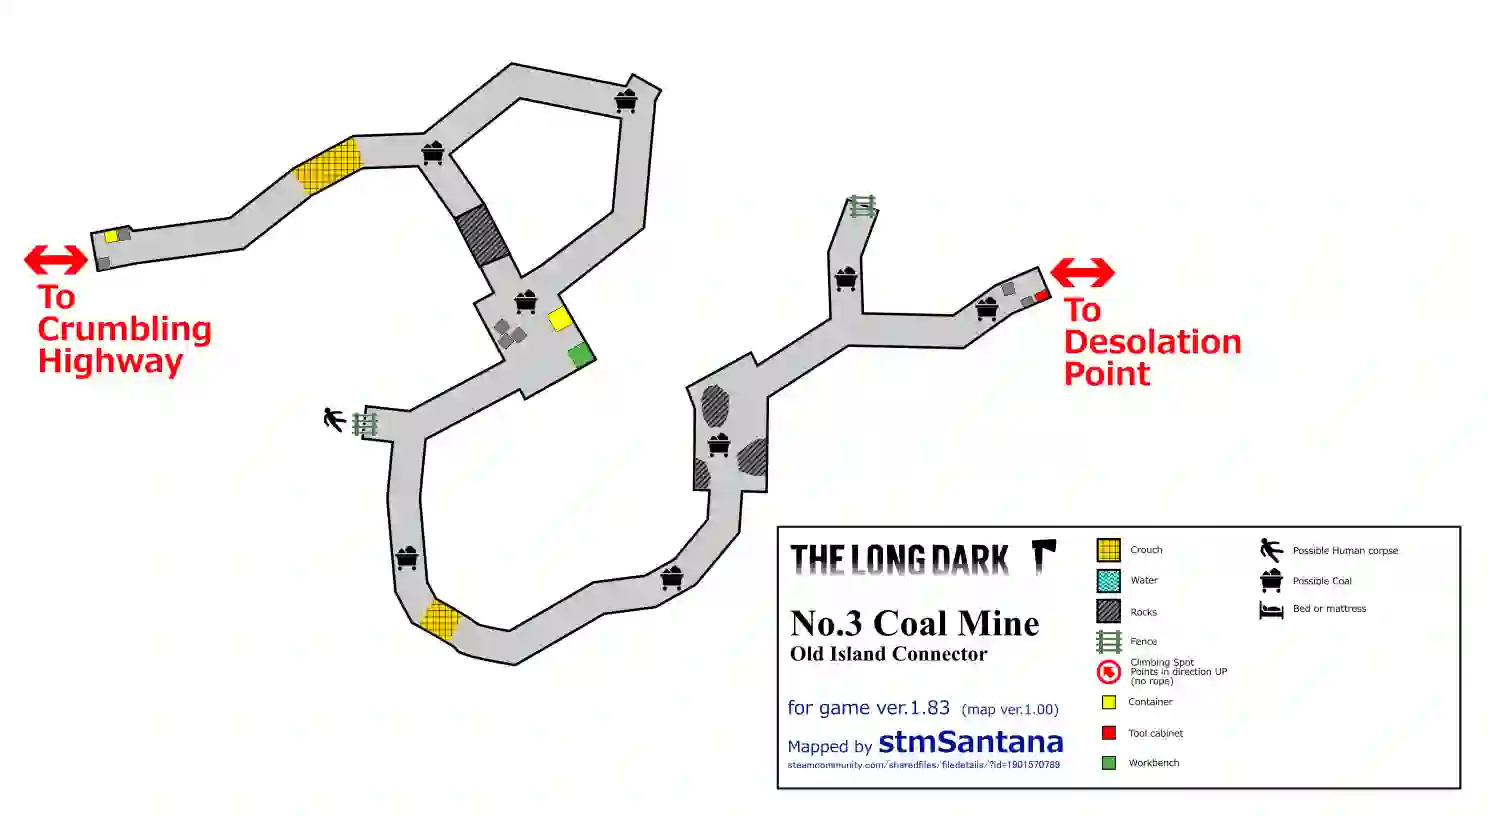 The Long Dark No. 3 Coal Mine - Old Island Connector Map from Crumbling Highway to Desolation Point map. This map includes all information to roam around this area.